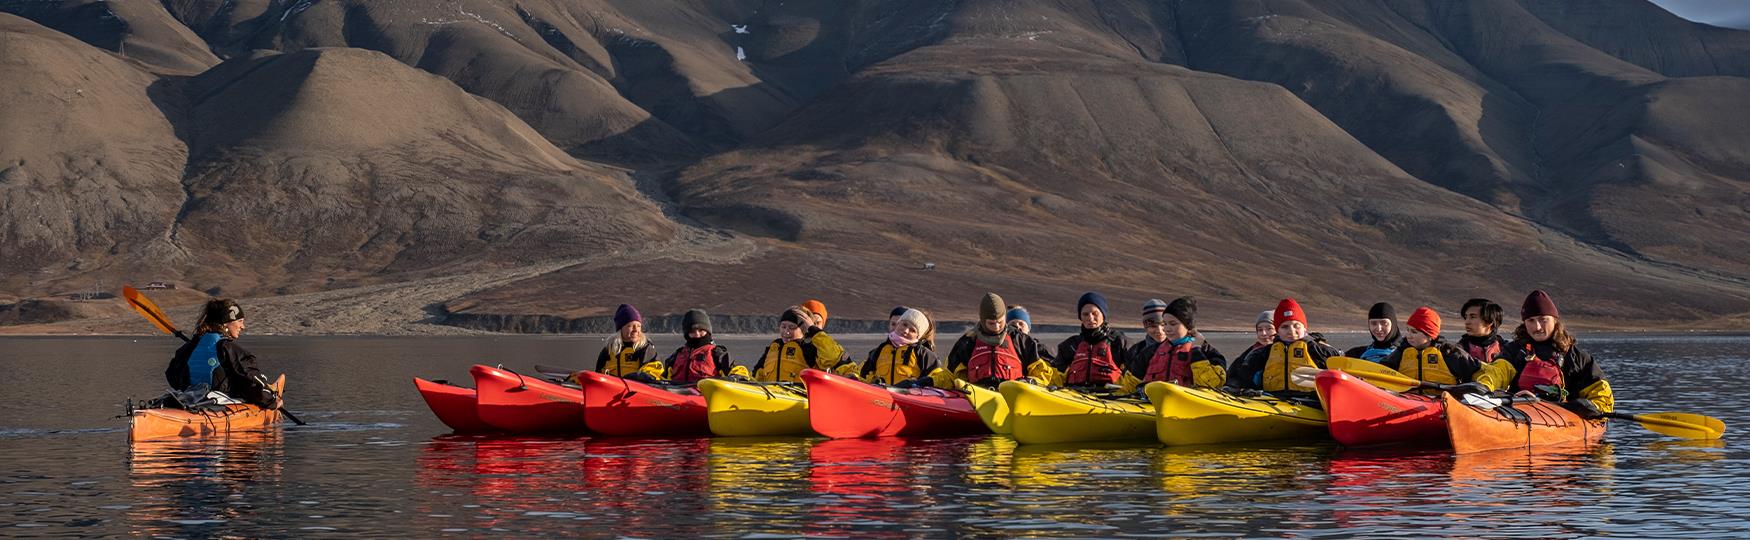 A group of guests and a guide in kayaks on a fjord with mountains in the background